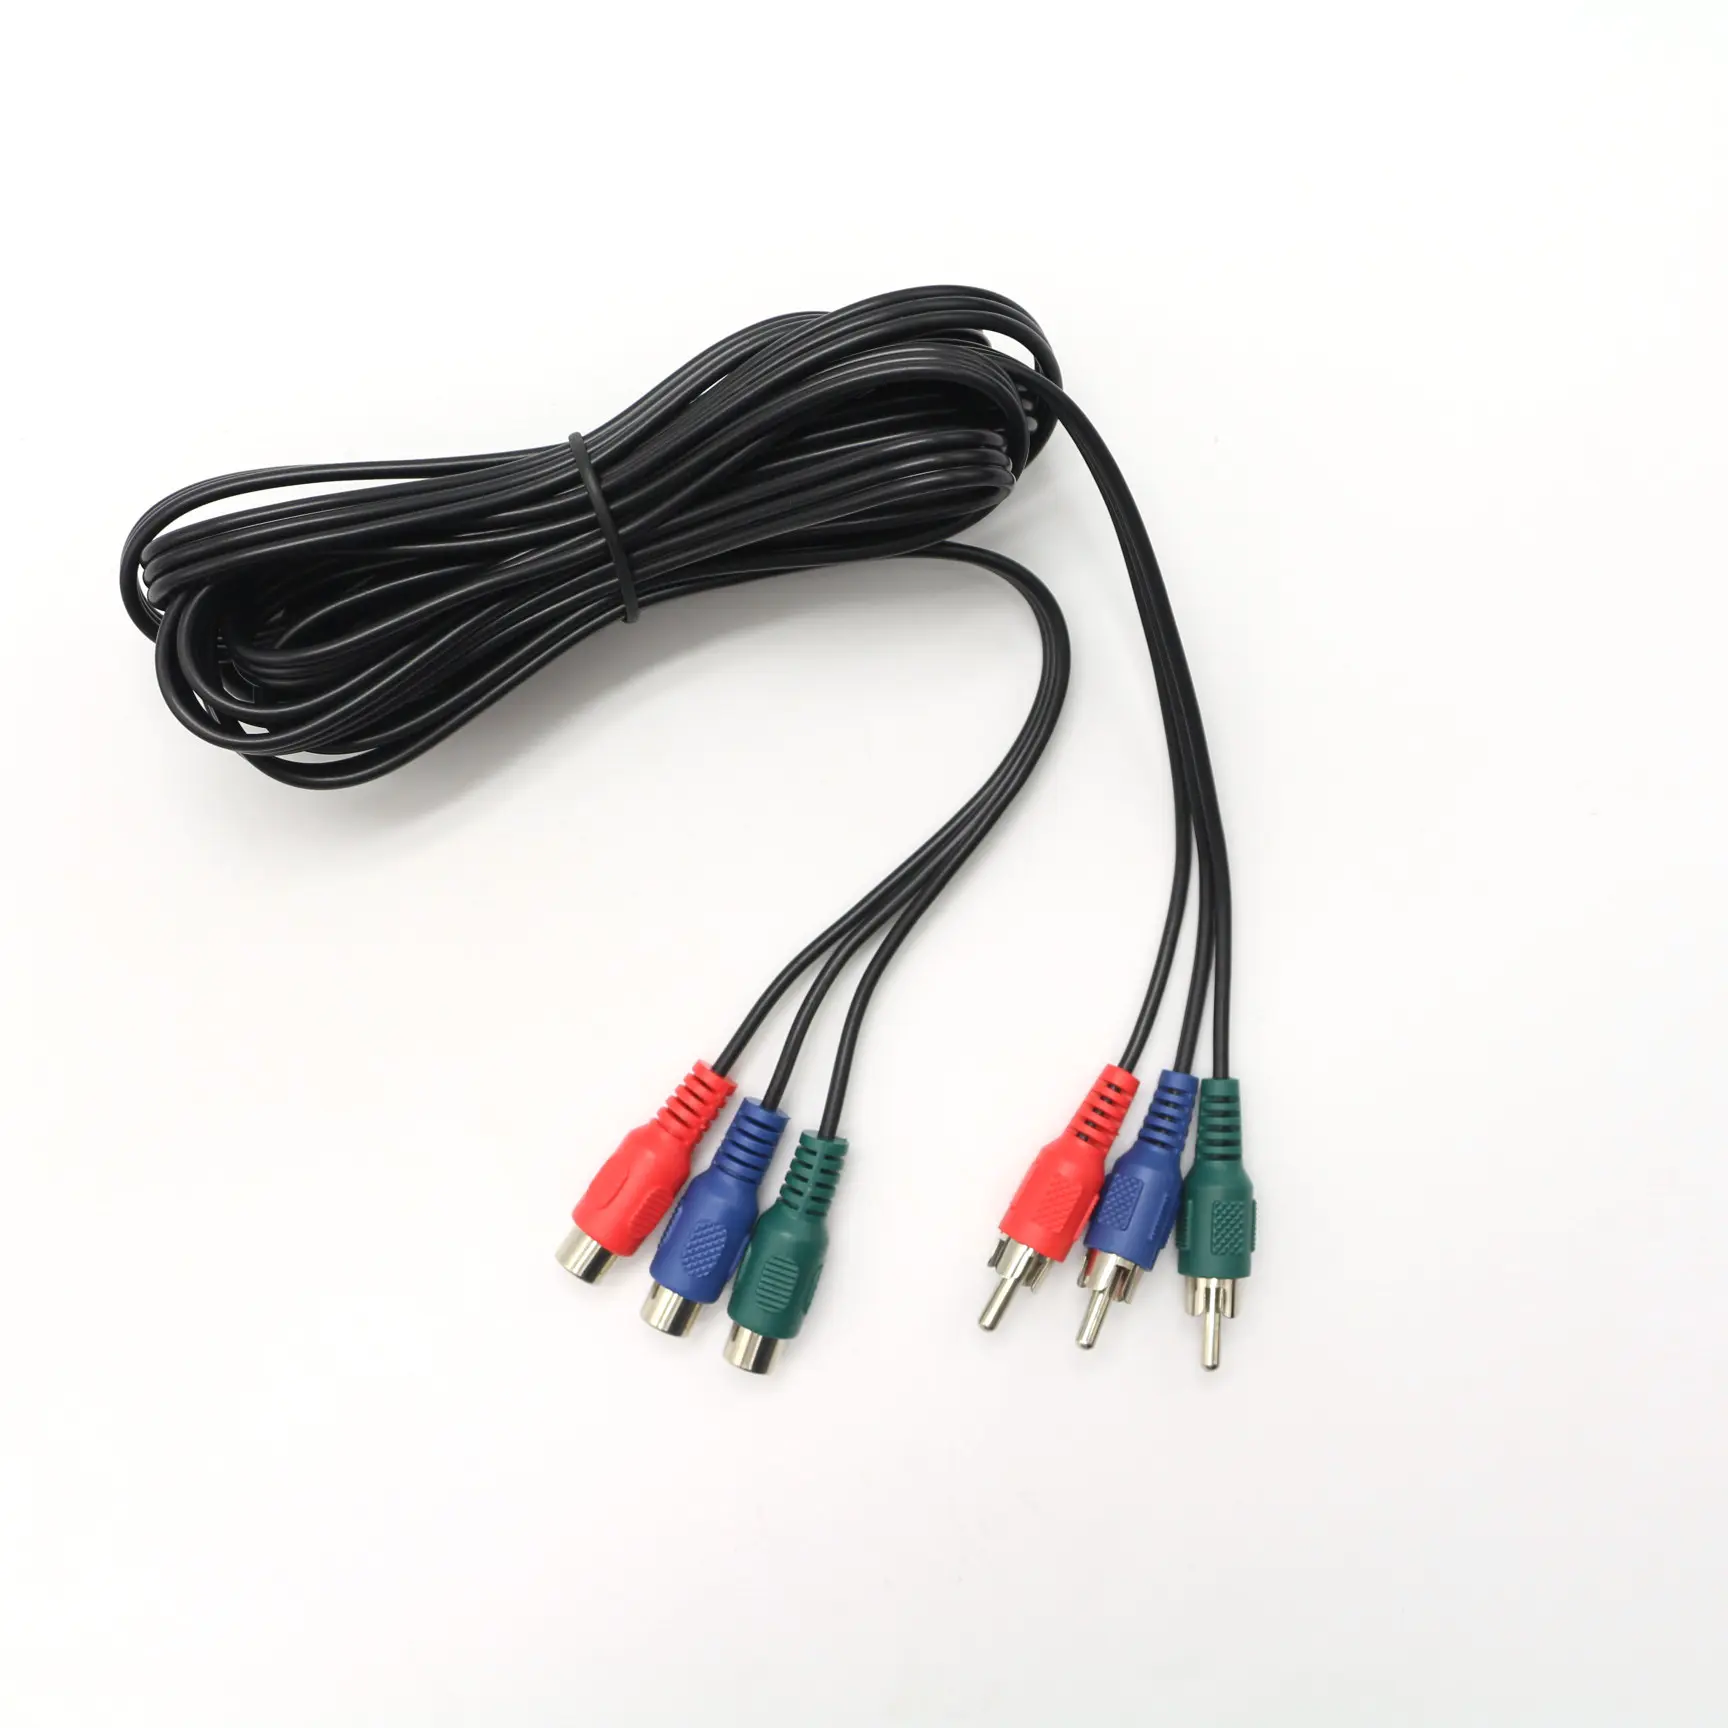 Factory Price Gold Nickle Plated Av 3rca To 3rca Cable Audio Video Cable 3 Rca Pure copper OFC Cable For Vcr Dvd Hdtv